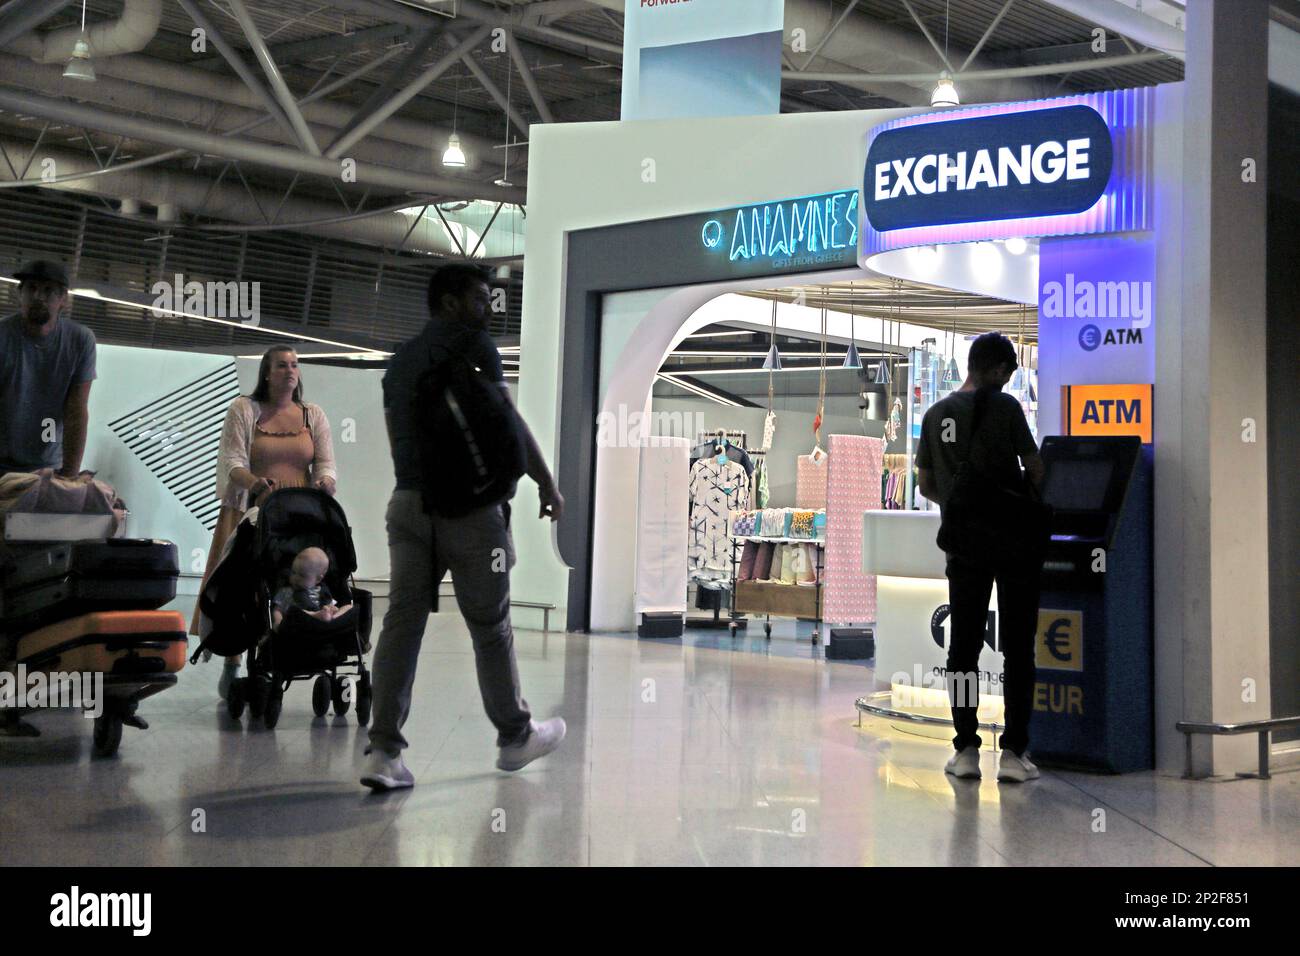 Athens Greece Athens International Airport (AIA) Eleftherios Venizelos Family Pushing Luggage on Airport Trolley by ATM and Currency Exchange Machine Stock Photo